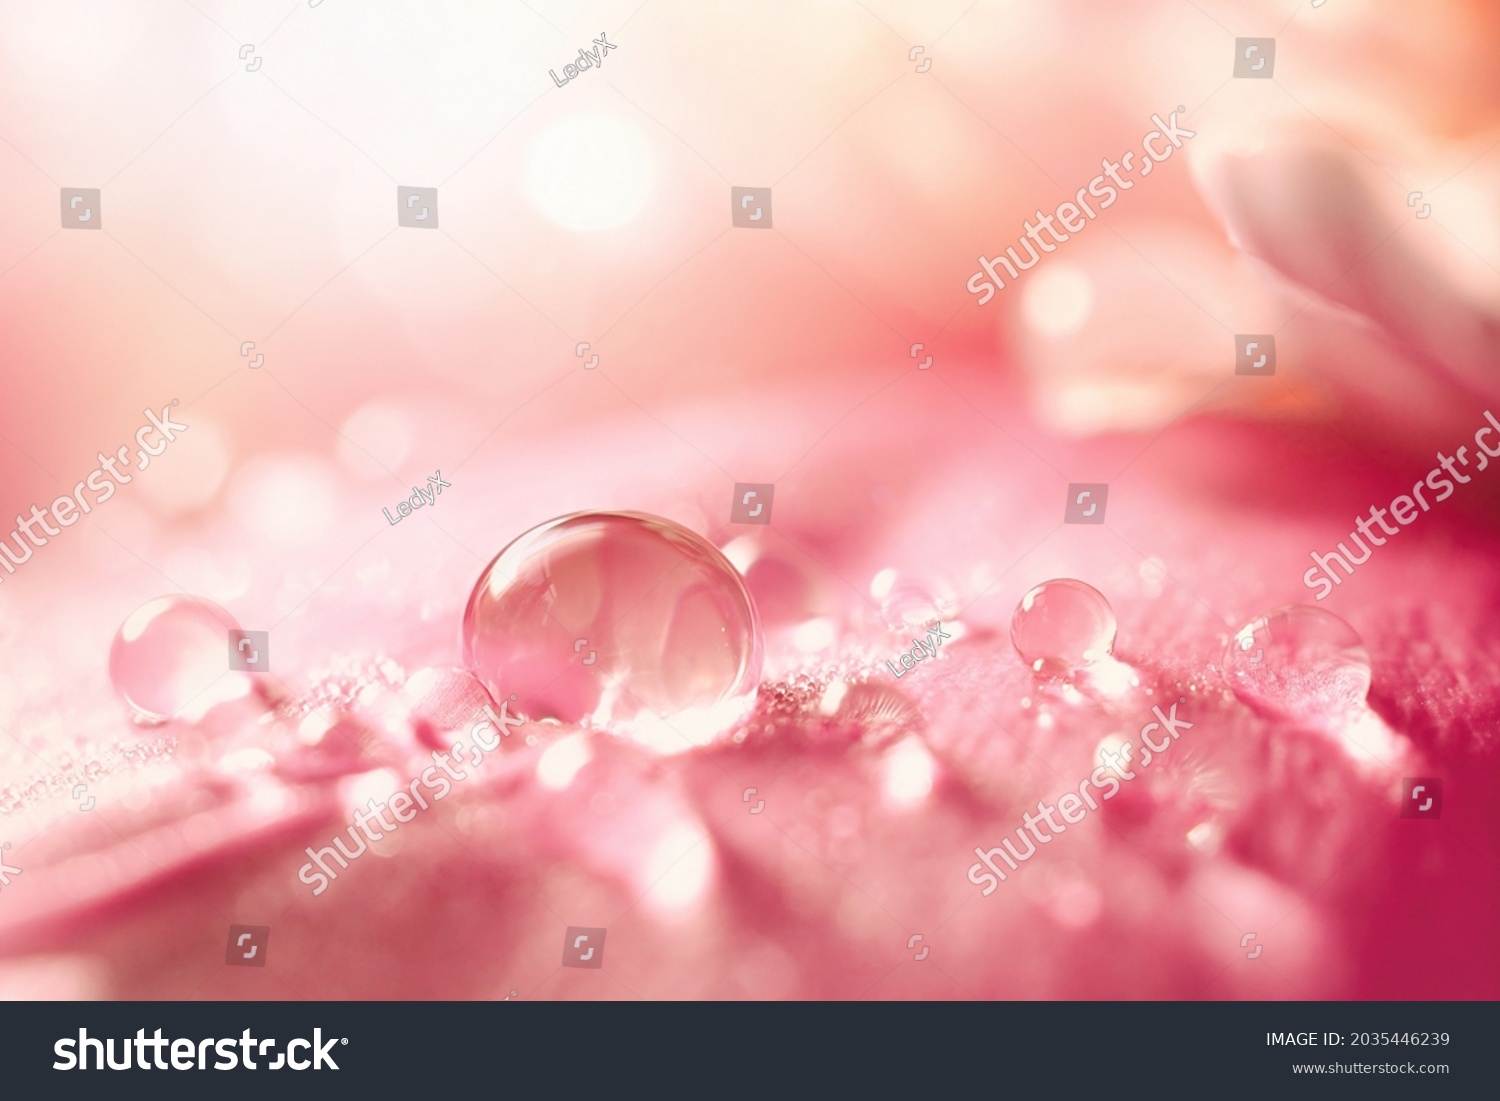 Beautiful transparent drops of water or dew with sun glare on petal of pink peony flower, macro. Gentle artistic image of purity and beauty of nature. #2035446239